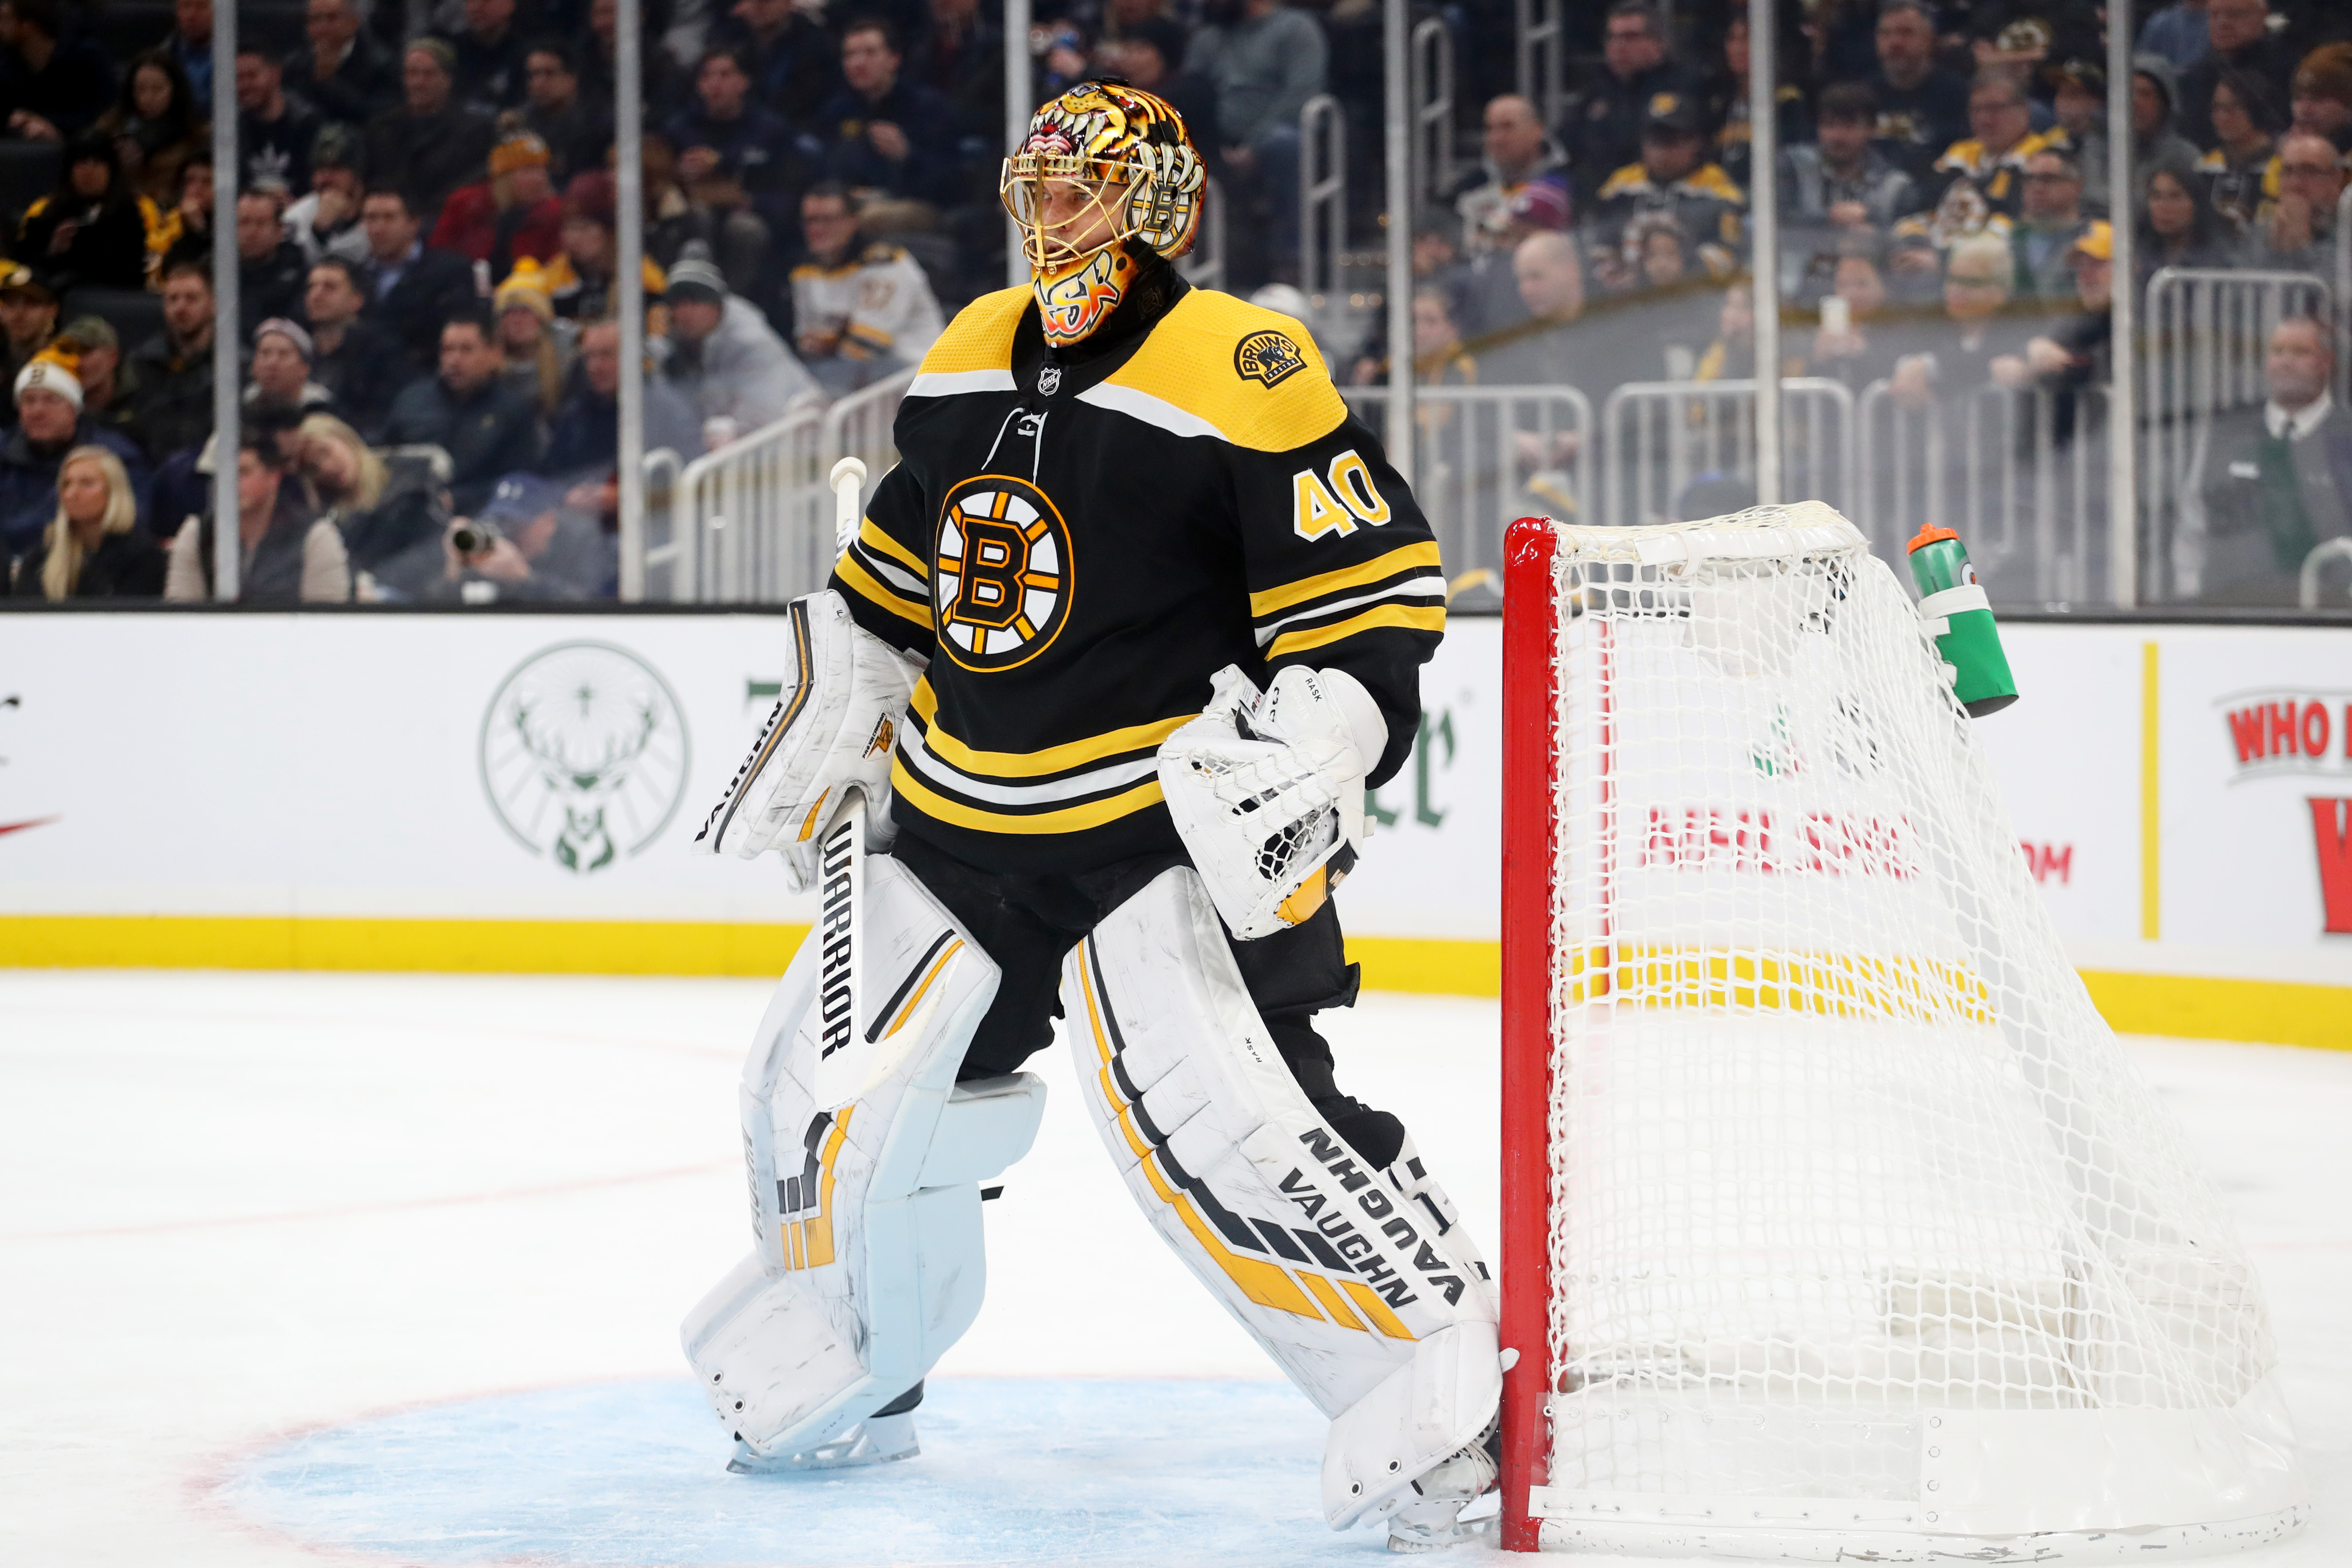 With no contract and upcoming surgery, Tuukka Rask's hockey future is  uncertain but he only wants to play in Boston - The Boston Globe